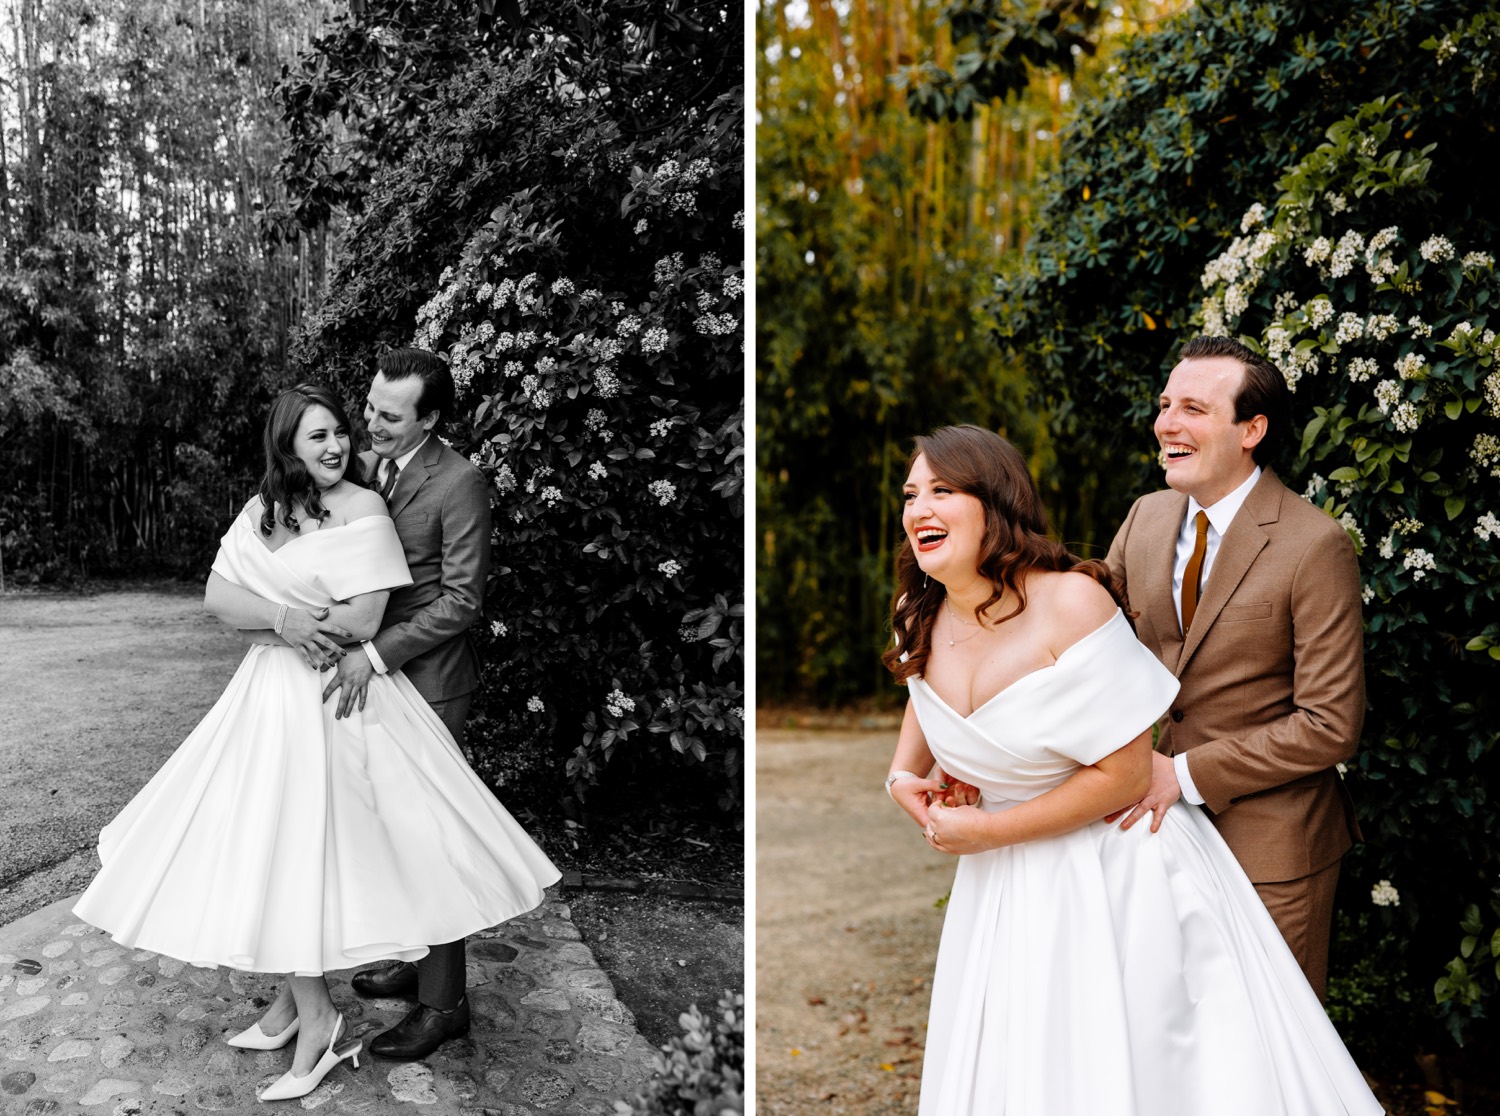 Orcutt Ranch Horticultural Center wedding photographed by Magaly Barajas